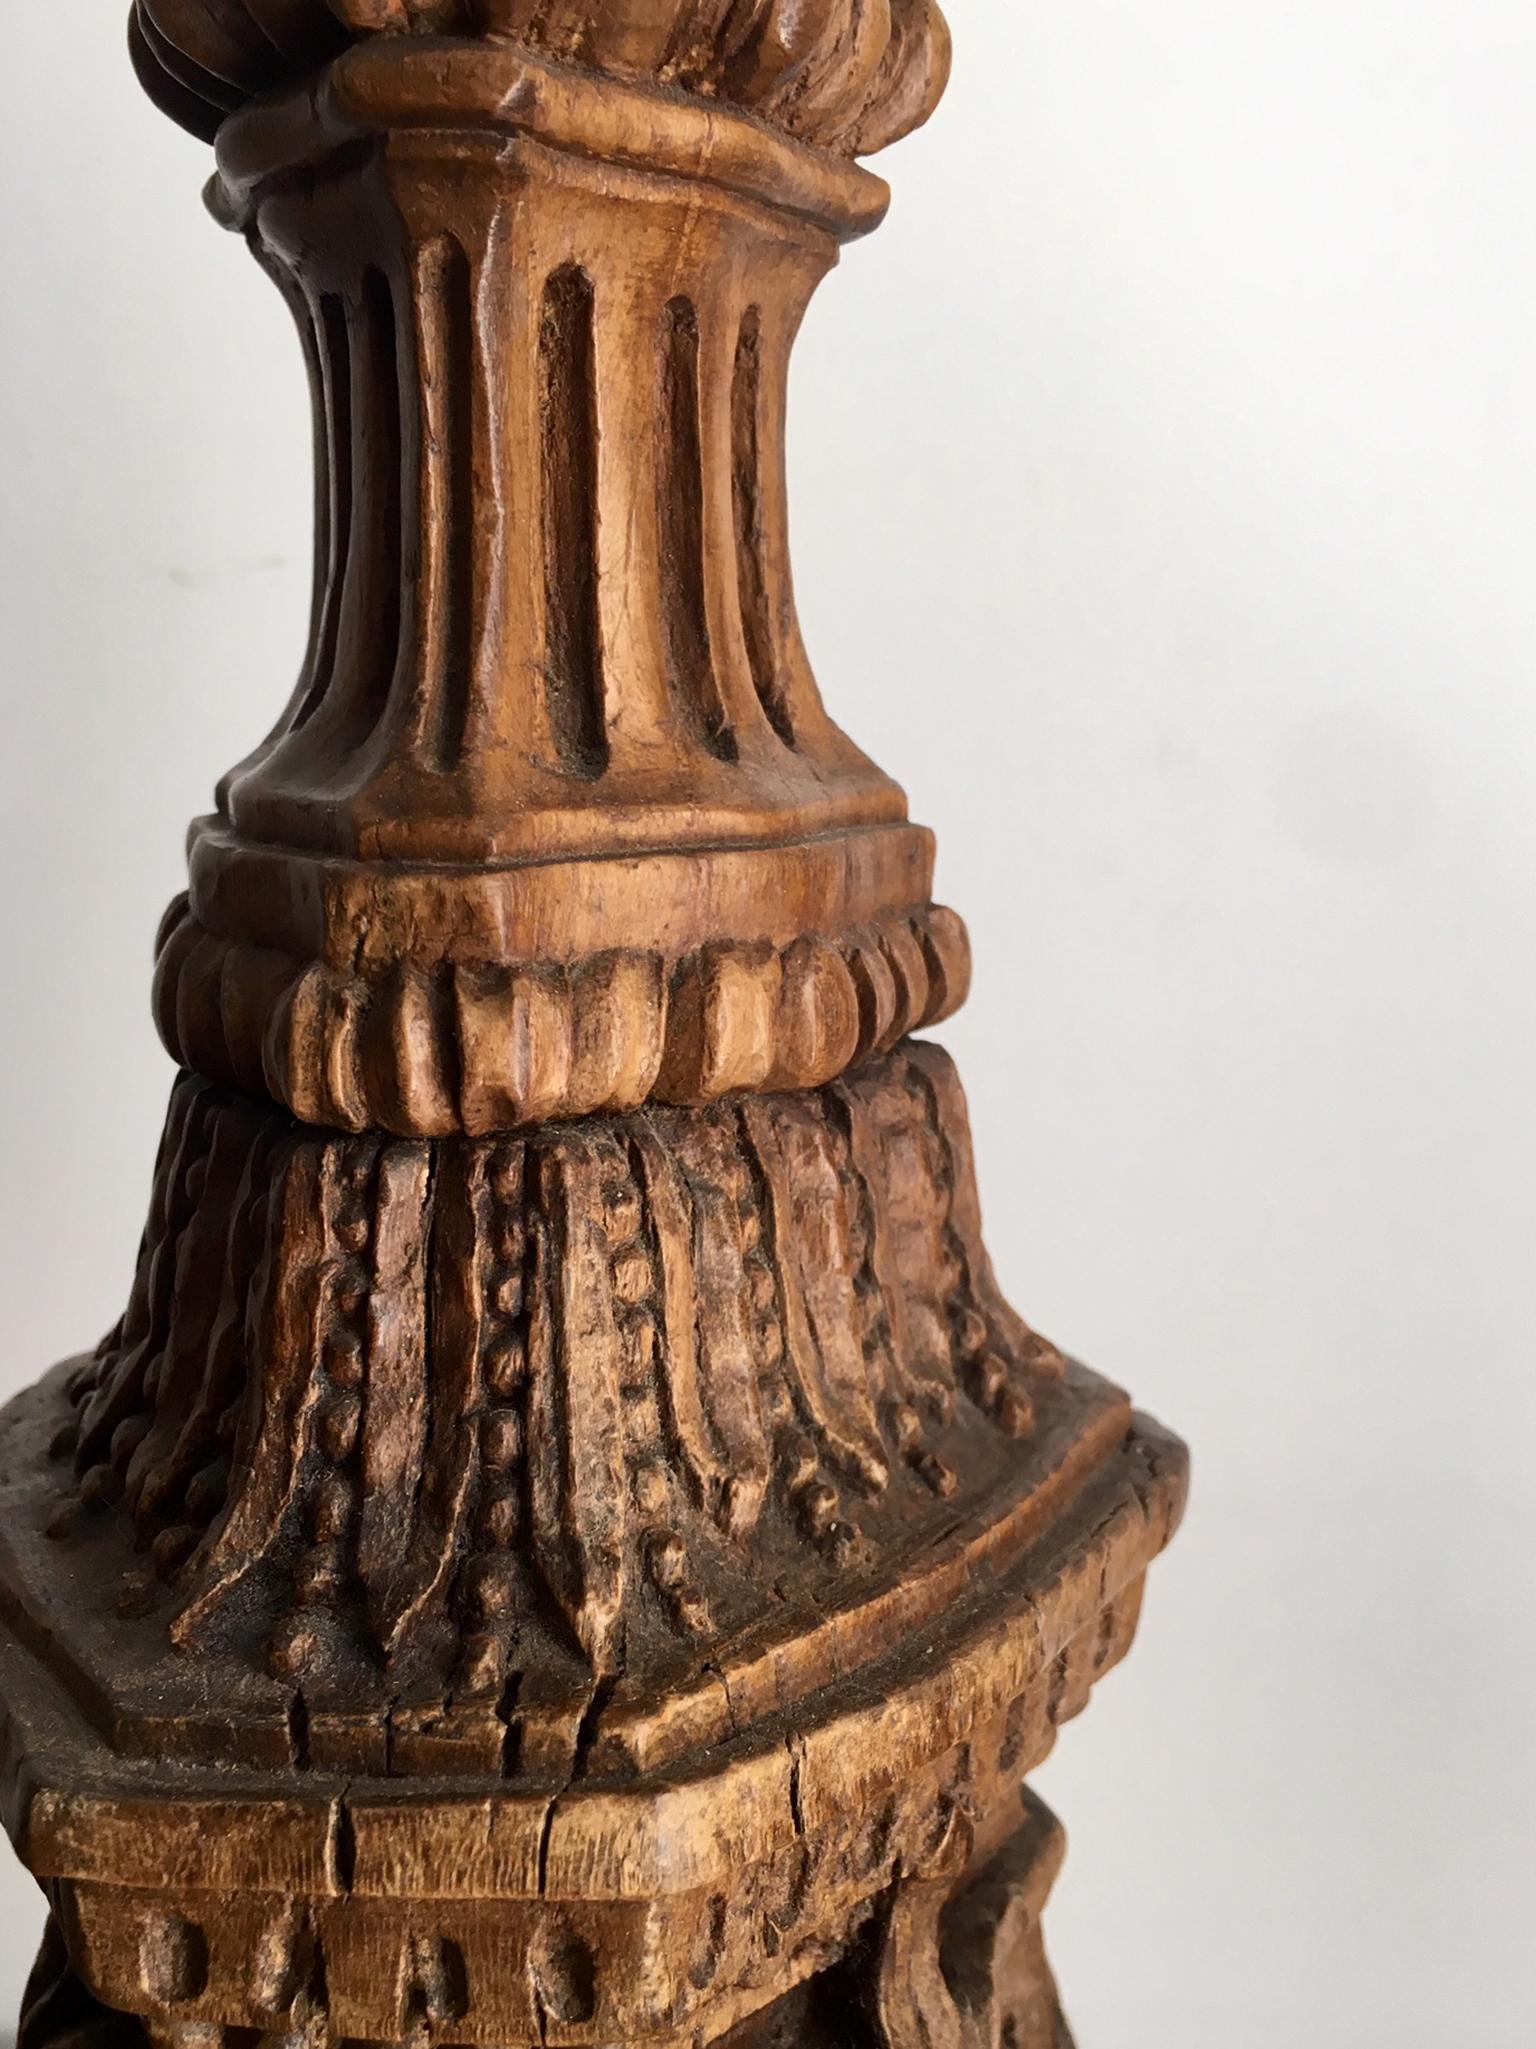 Baroque Table Lamp Mounted over 18th Century Portuguese Candle Stick Barroque